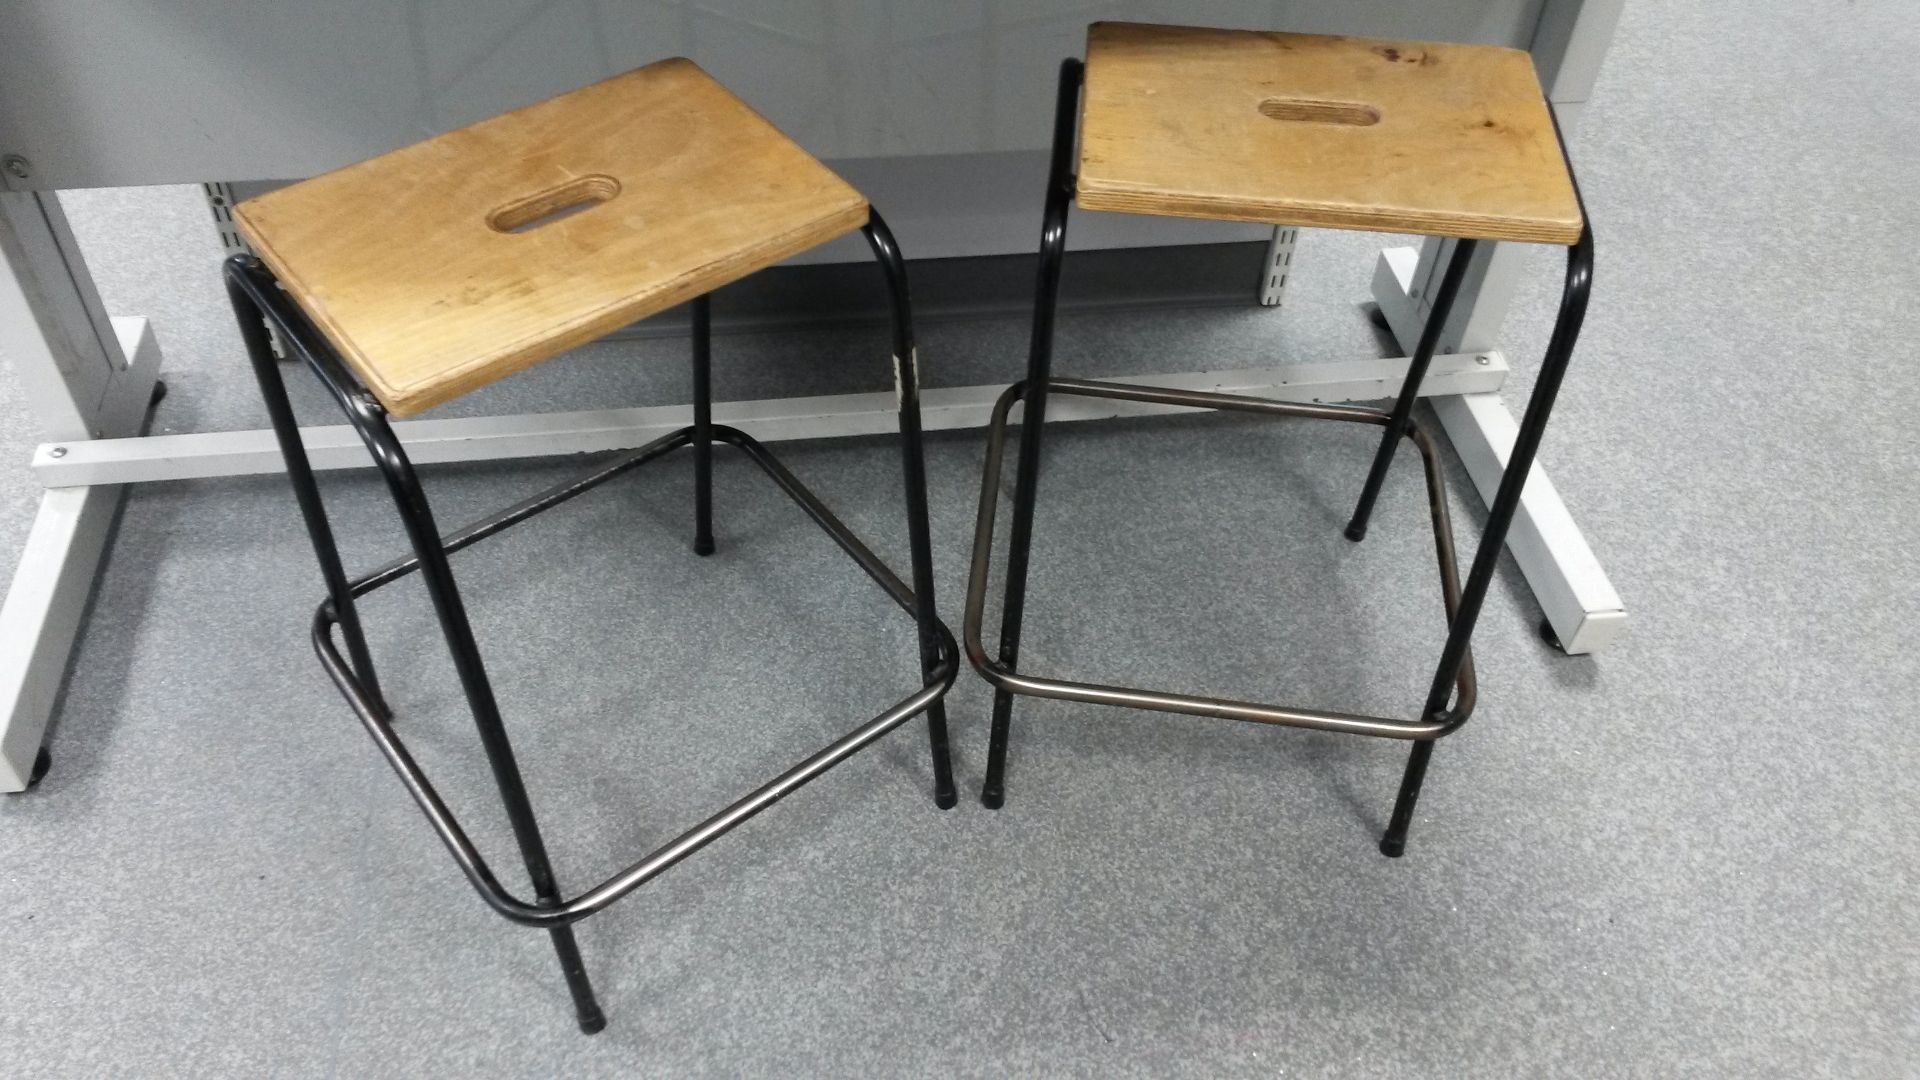 4x retro wood and metal stool 600mm h